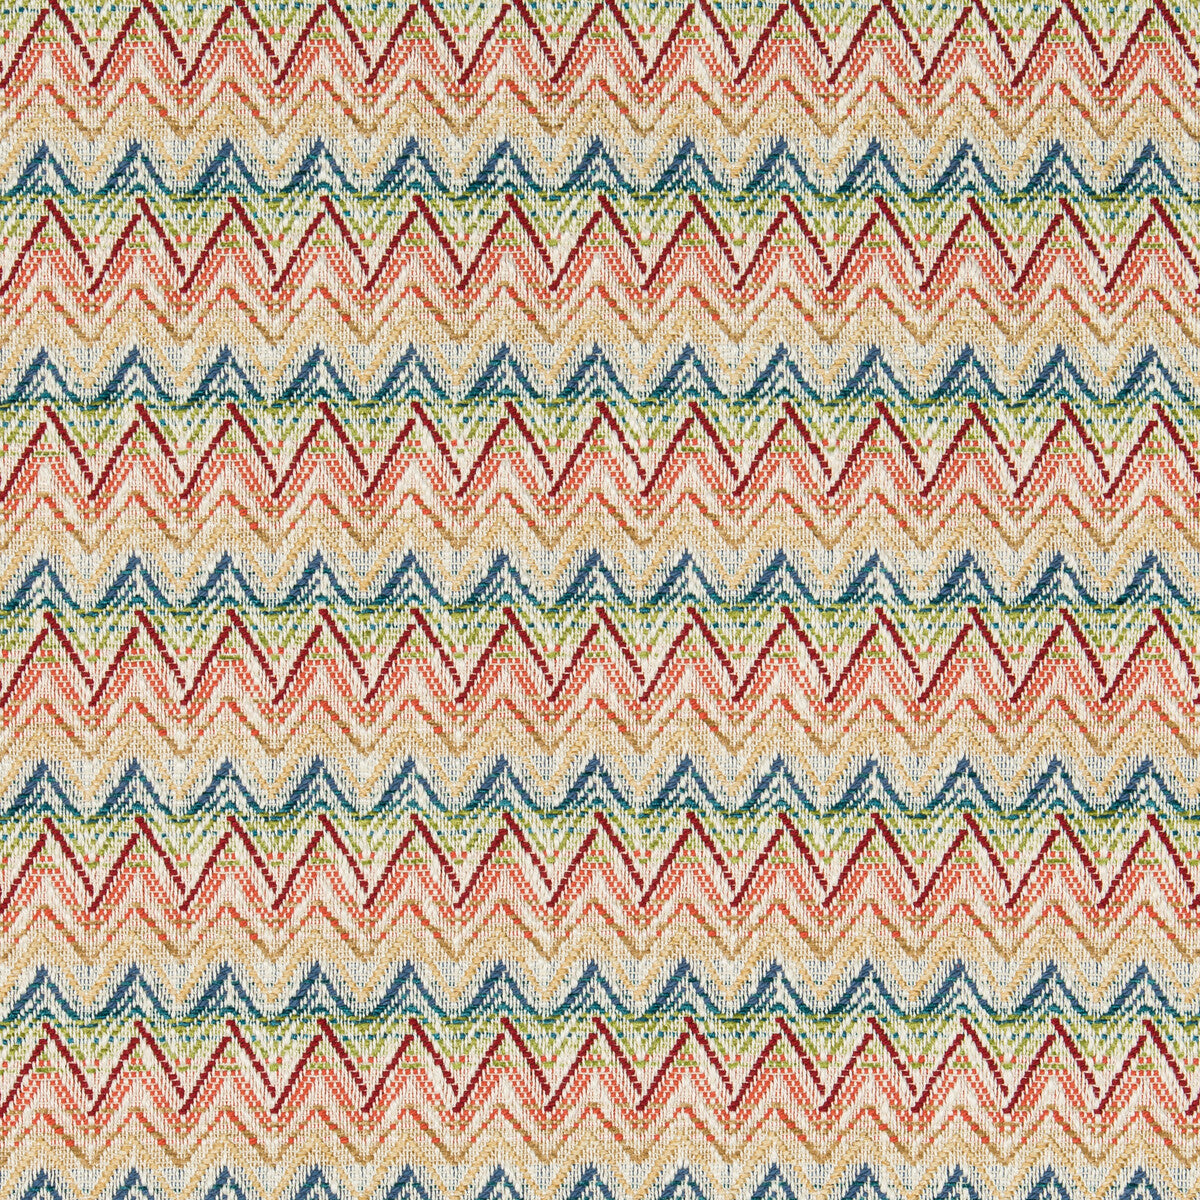 Cambrose Weave fabric in cabana color - pattern 2020107.549.0 - by Lee Jofa in the Linford Weaves collection